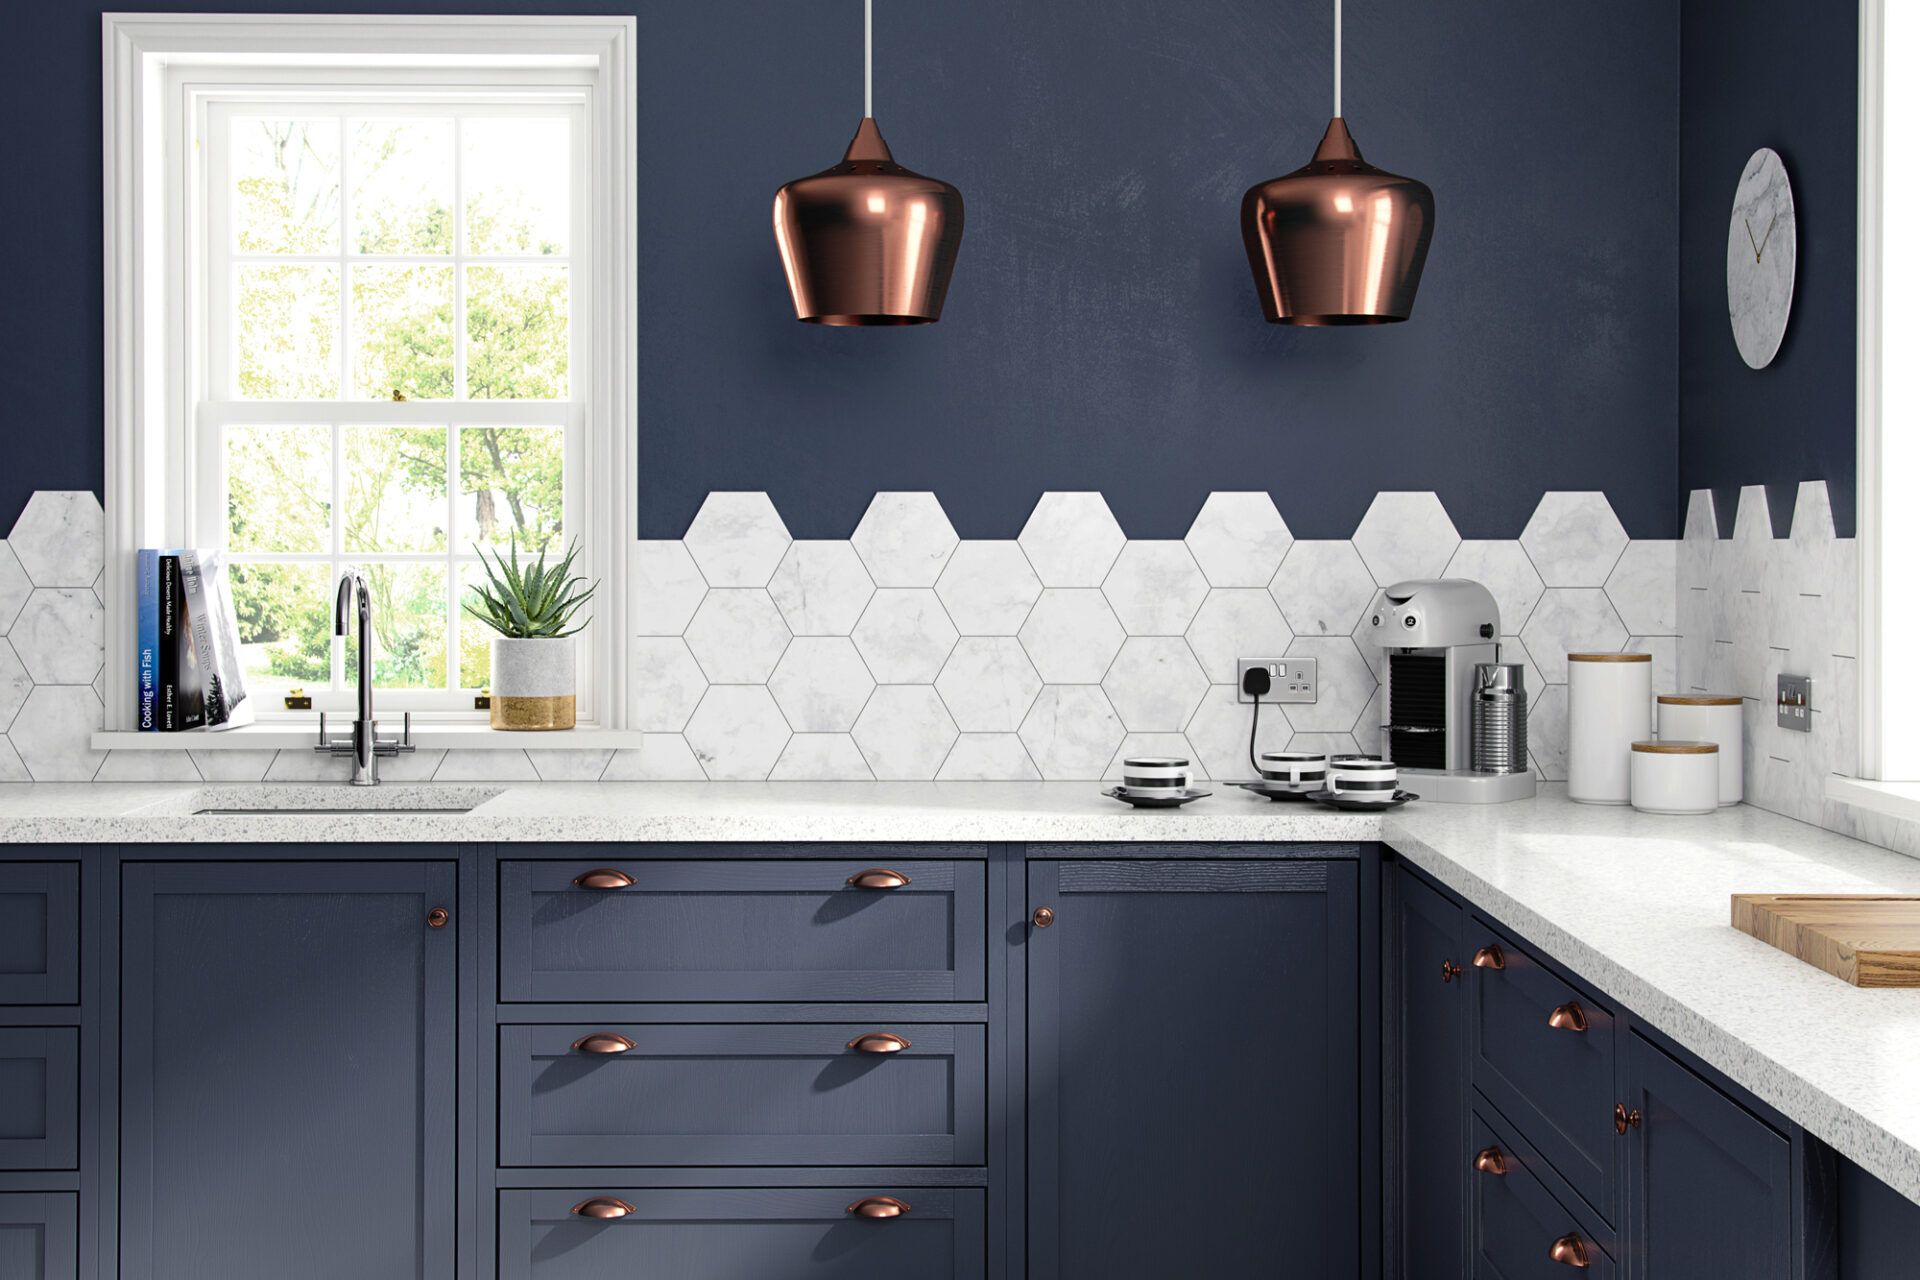 British Ceramic Tile launches kitchen tile collection to support